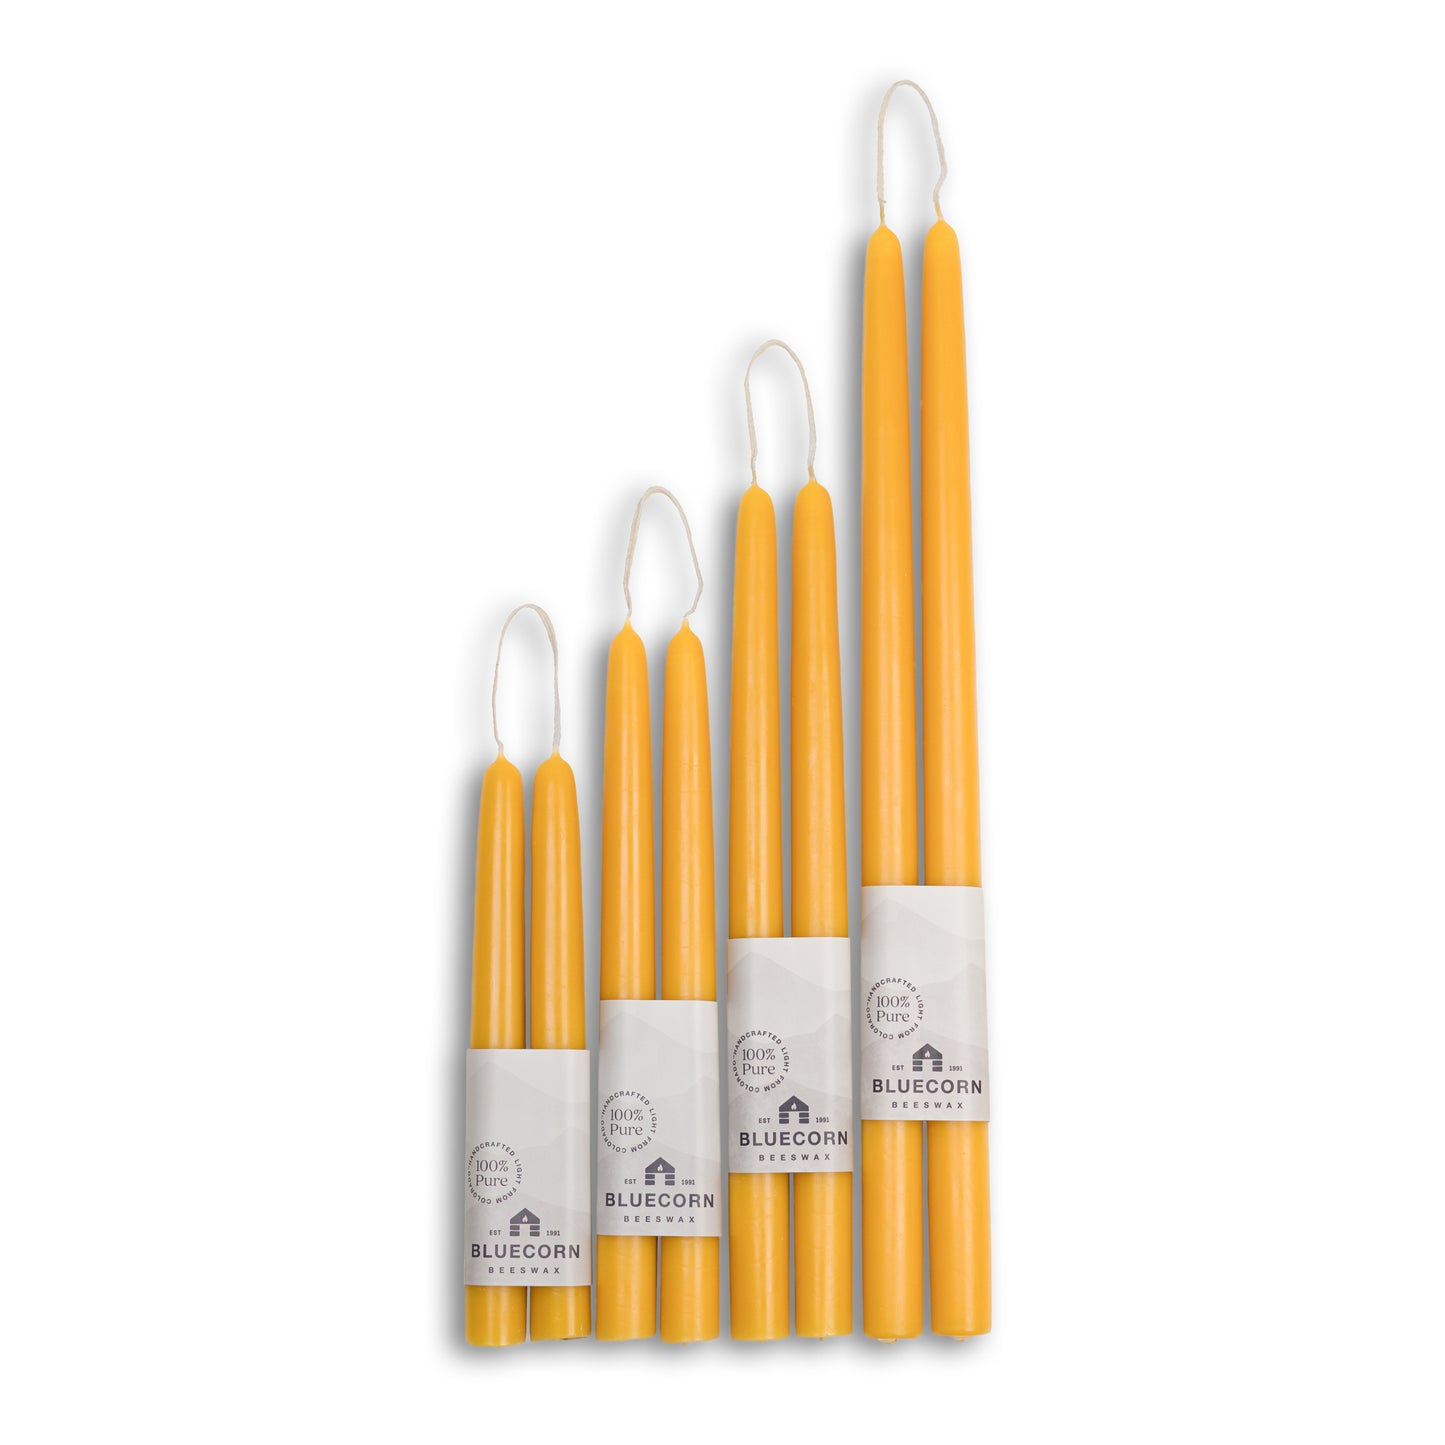 bluecorn candles raw beeswax taper candles in the full range of lengths